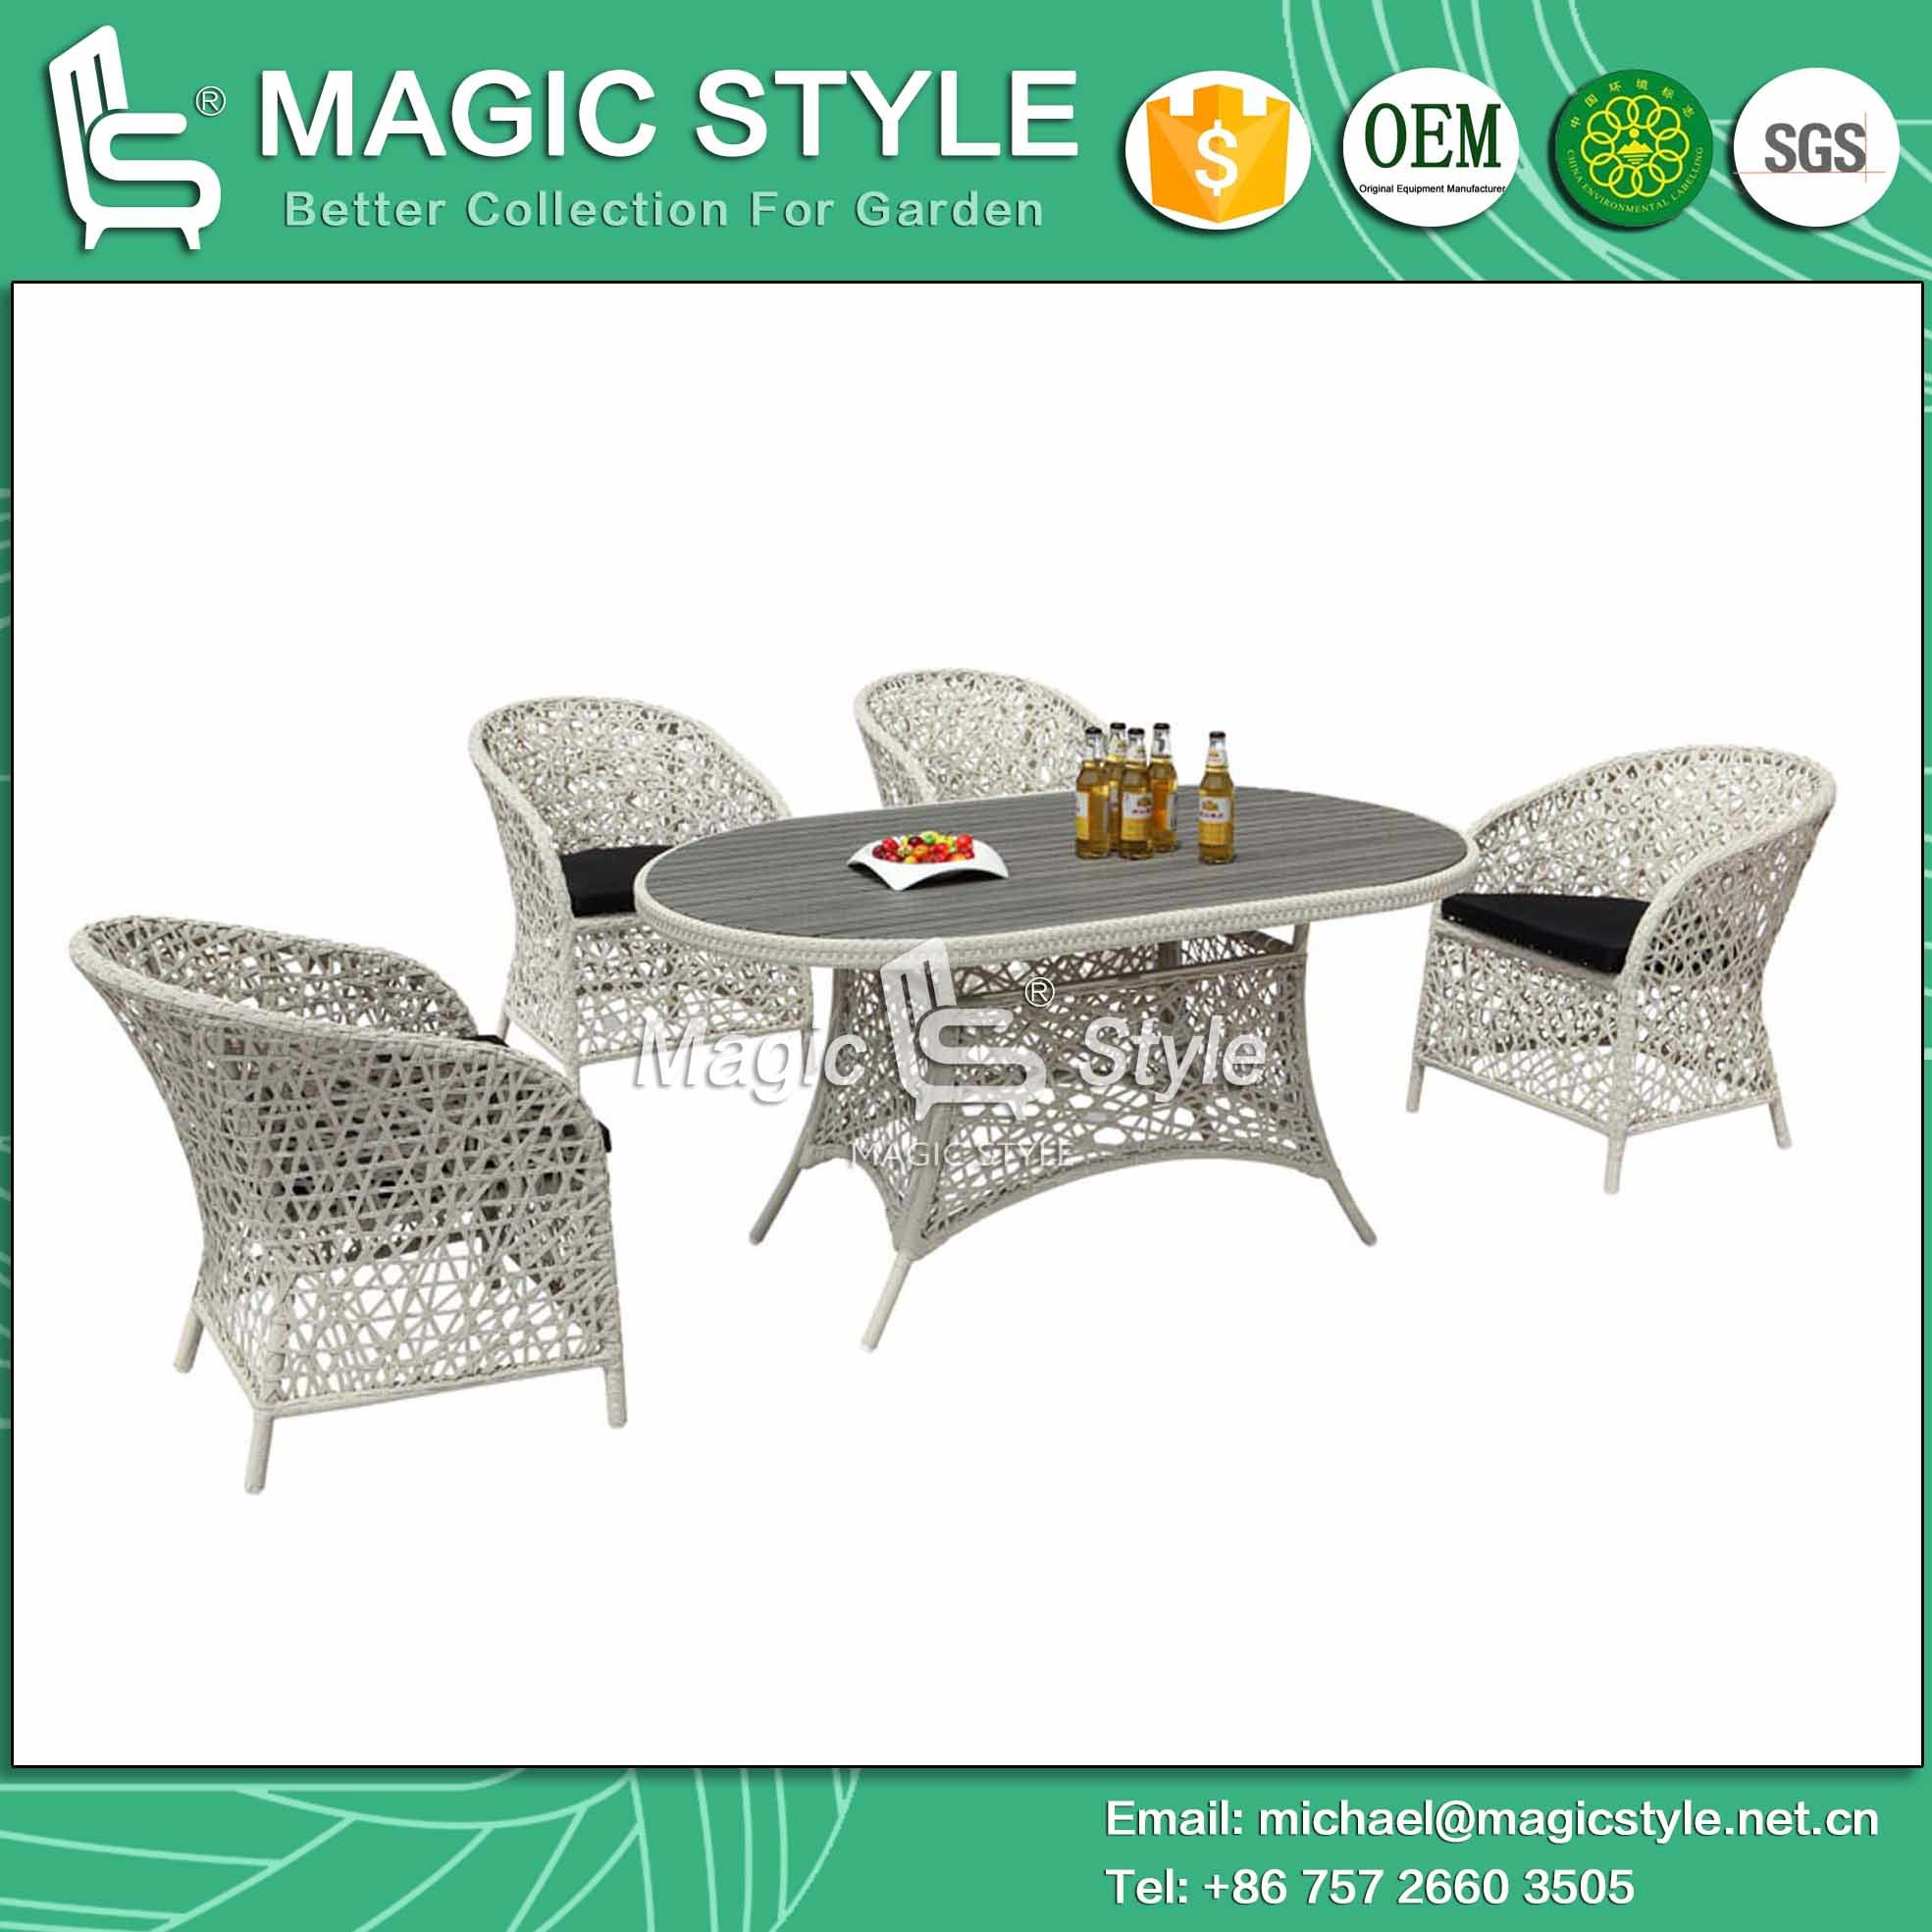 Outdoor Dining Set Rattan Chair Wicker Table Patio Furniture Dining Chair Garden Furniture (Magic Style)